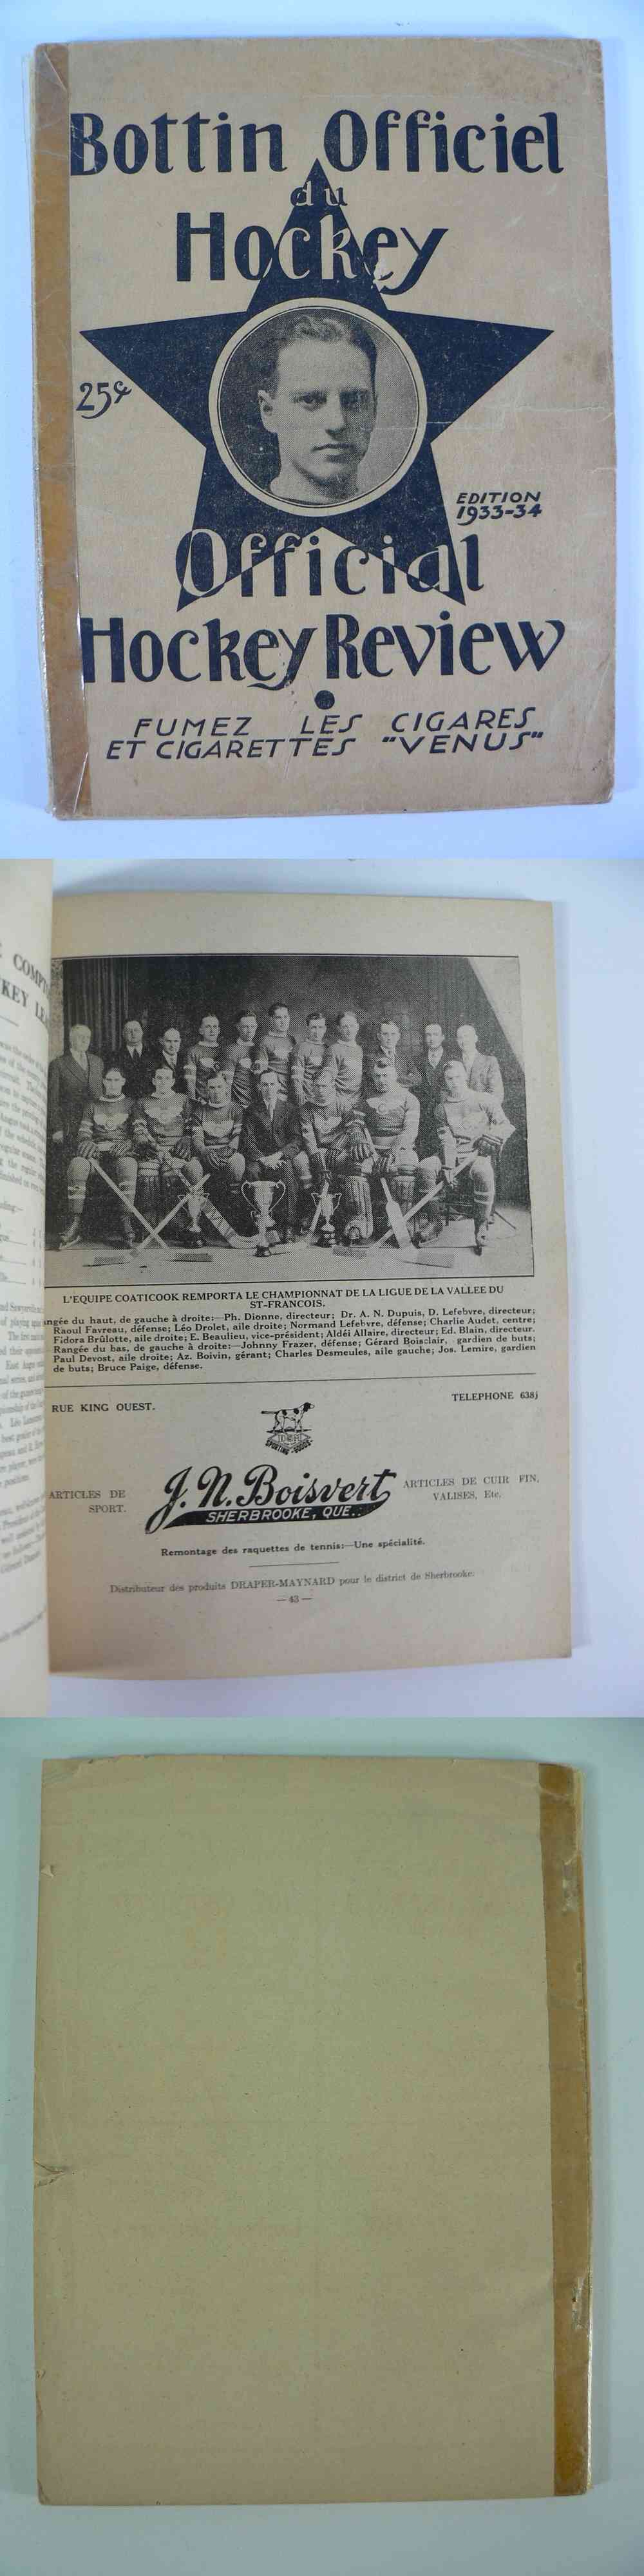 1933-34 HOCKEY REVIEW A. JOLIAT ON COVER photo